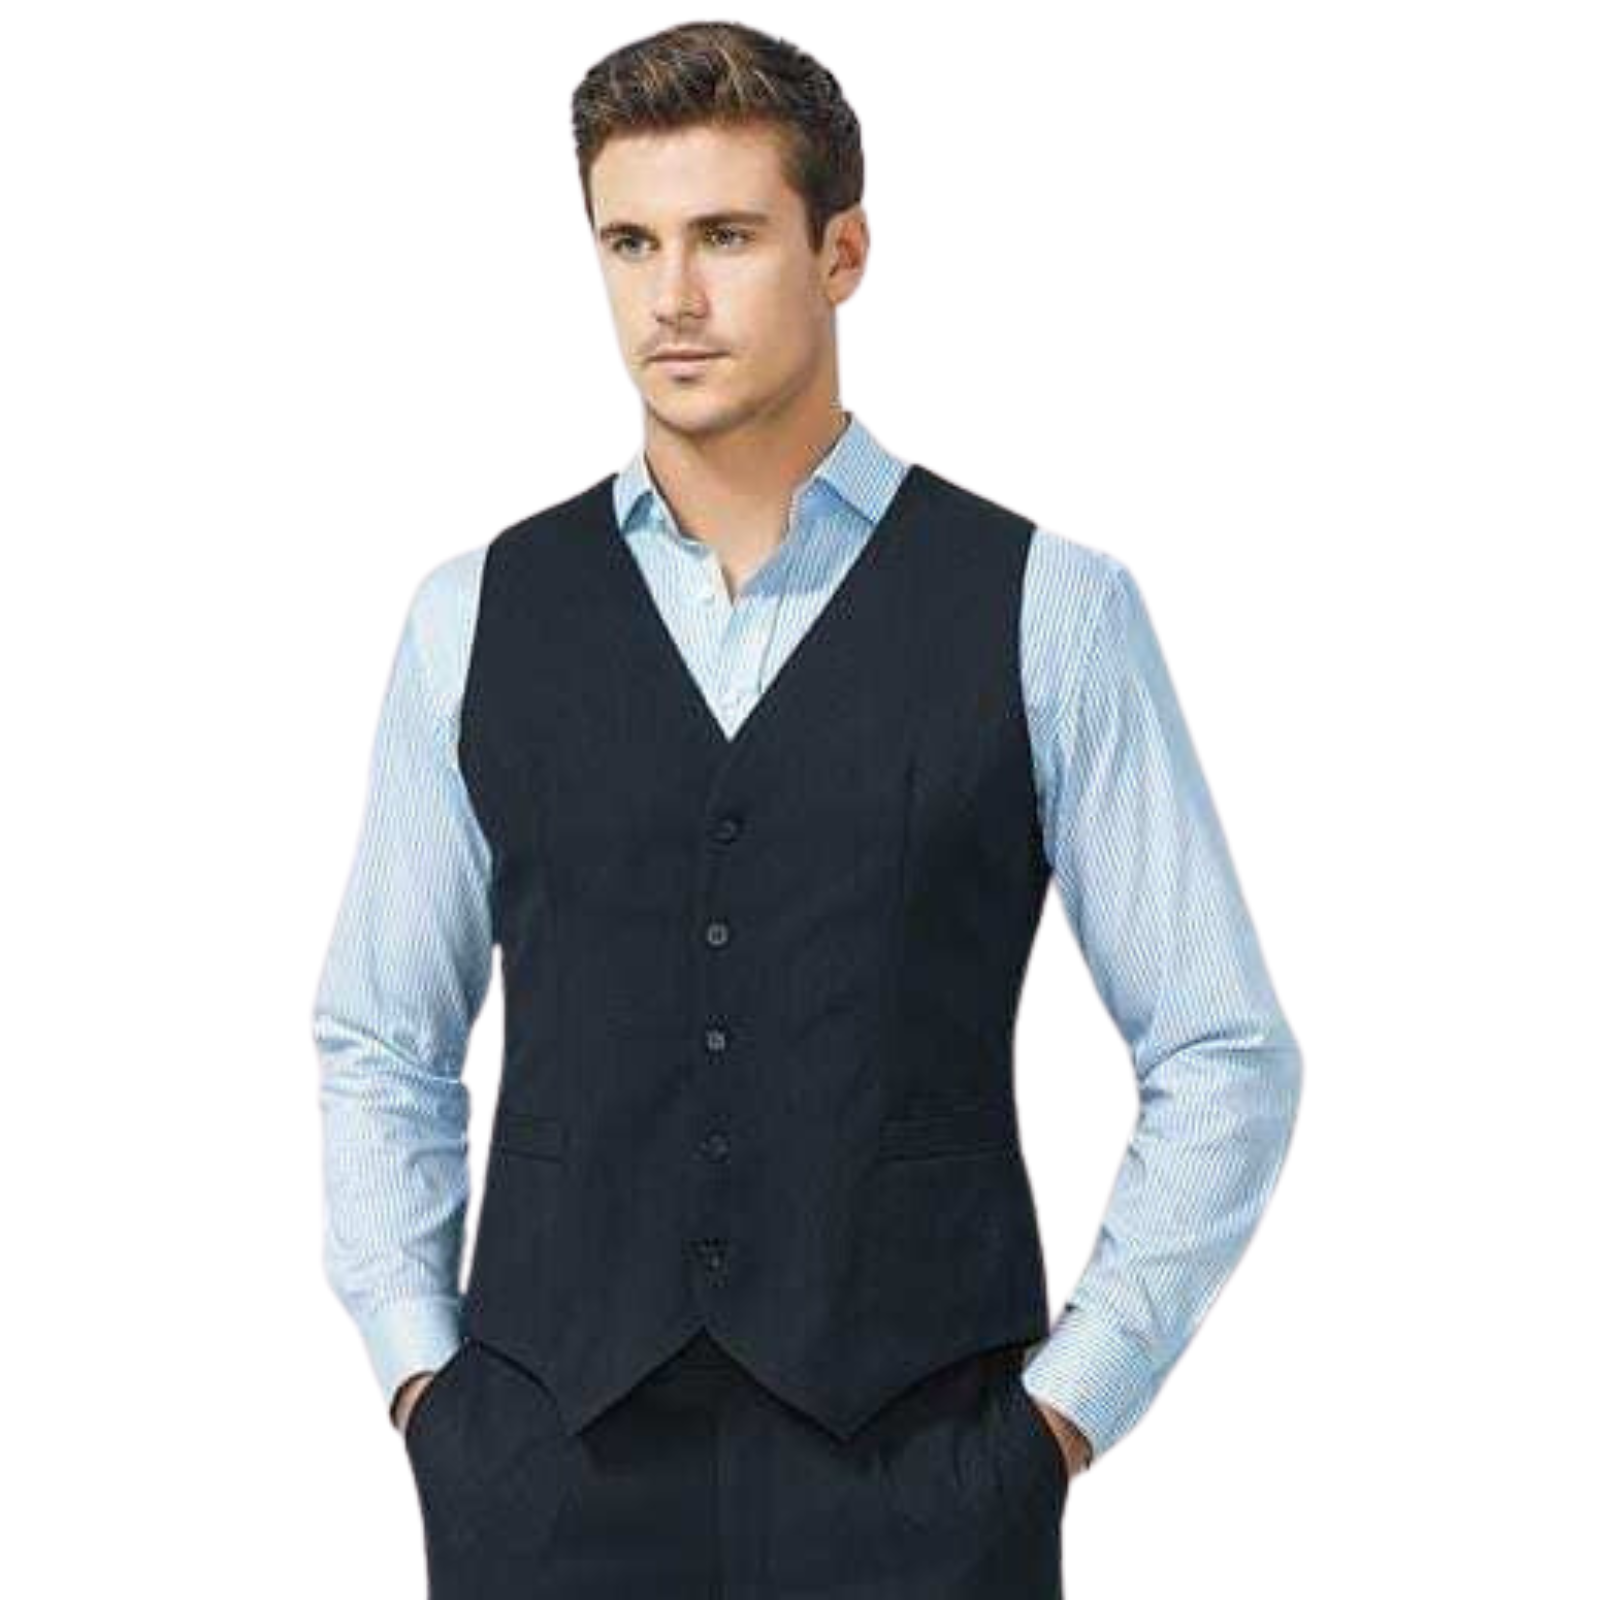 Mens Peaked Vest Waistcoat w/ Knitted Back Suit Formal Wedding Dress Up - Navy - 102